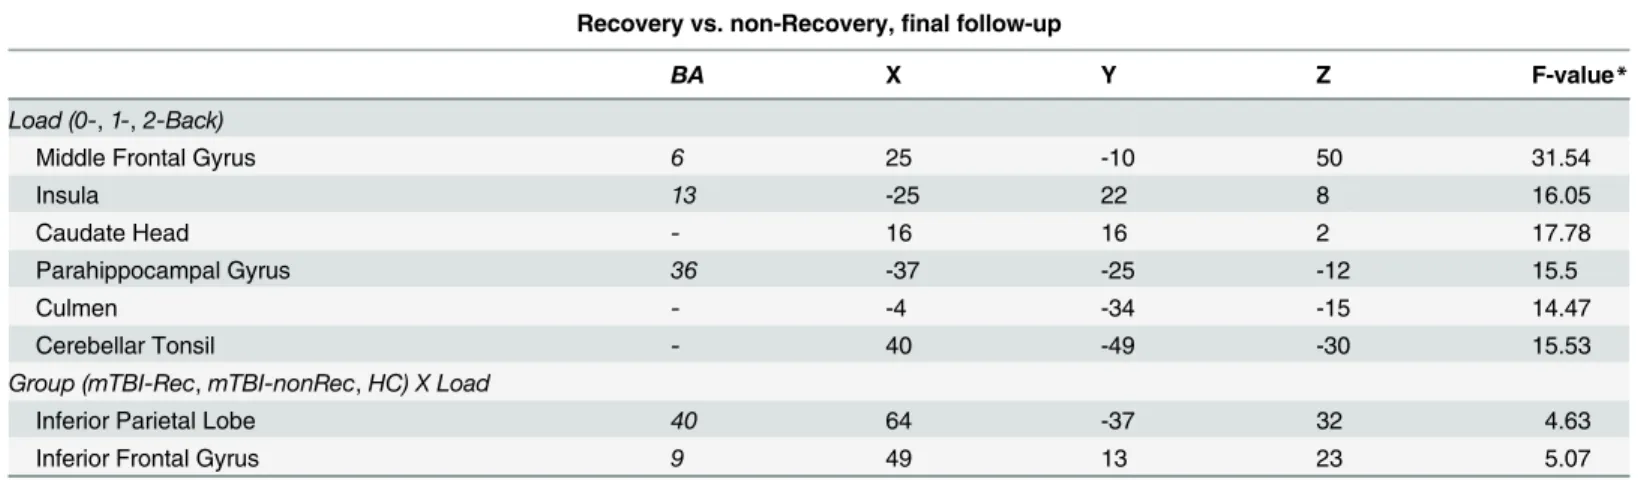 Table 8. Brain regions showing an interaction between Group and Load at 1 week post injury.